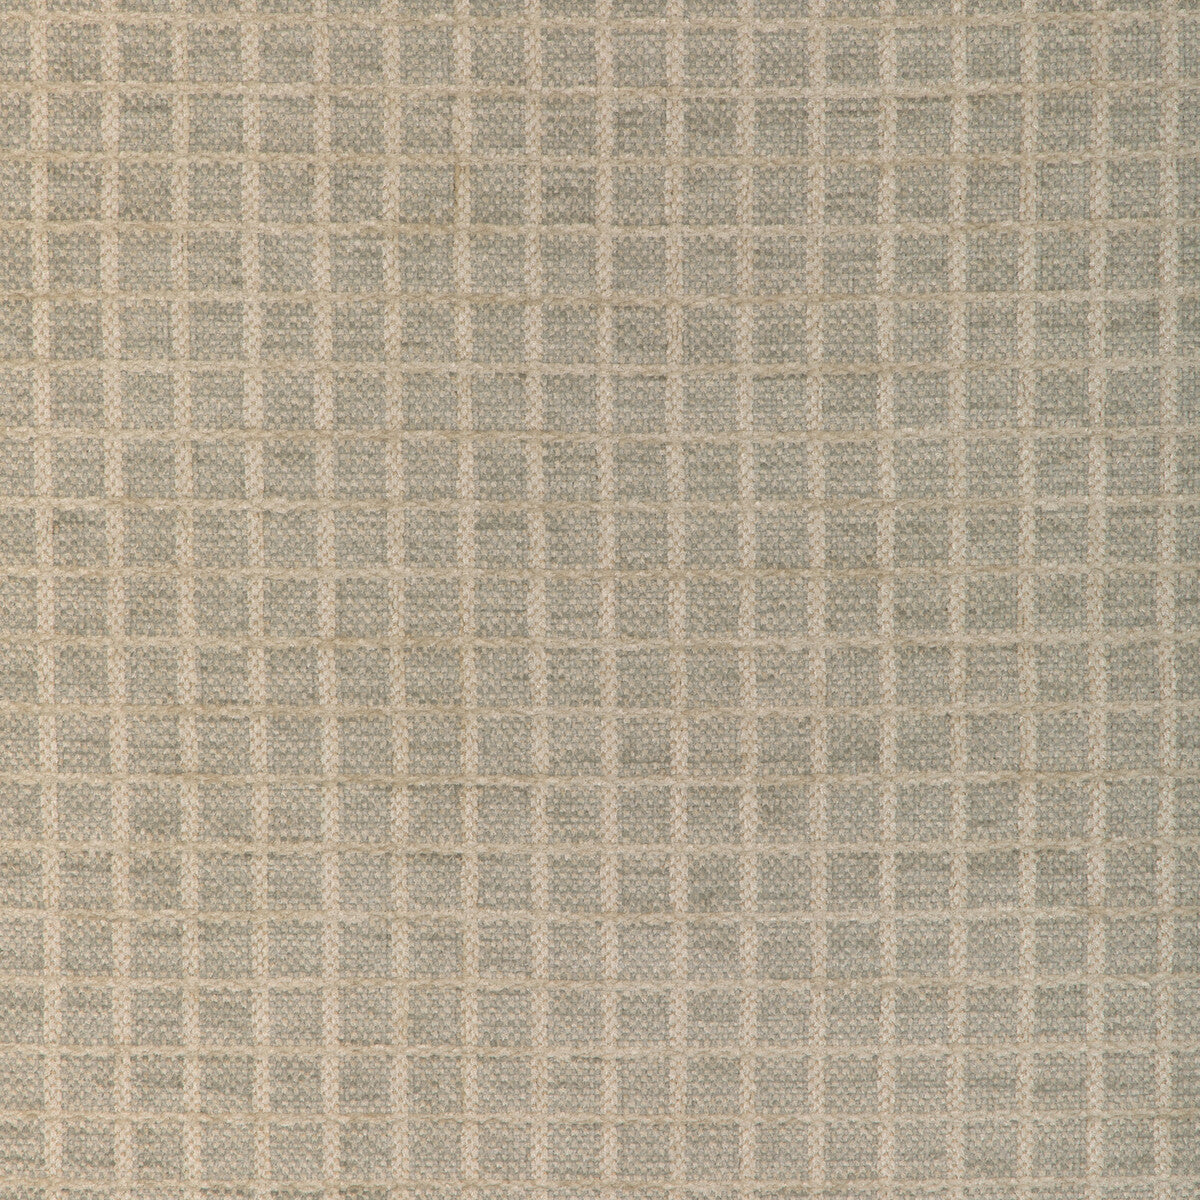 Chiron Texture fabric in stone color - pattern 8023155.11.0 - by Brunschwig &amp; Fils in the Chambery Textures IV collection